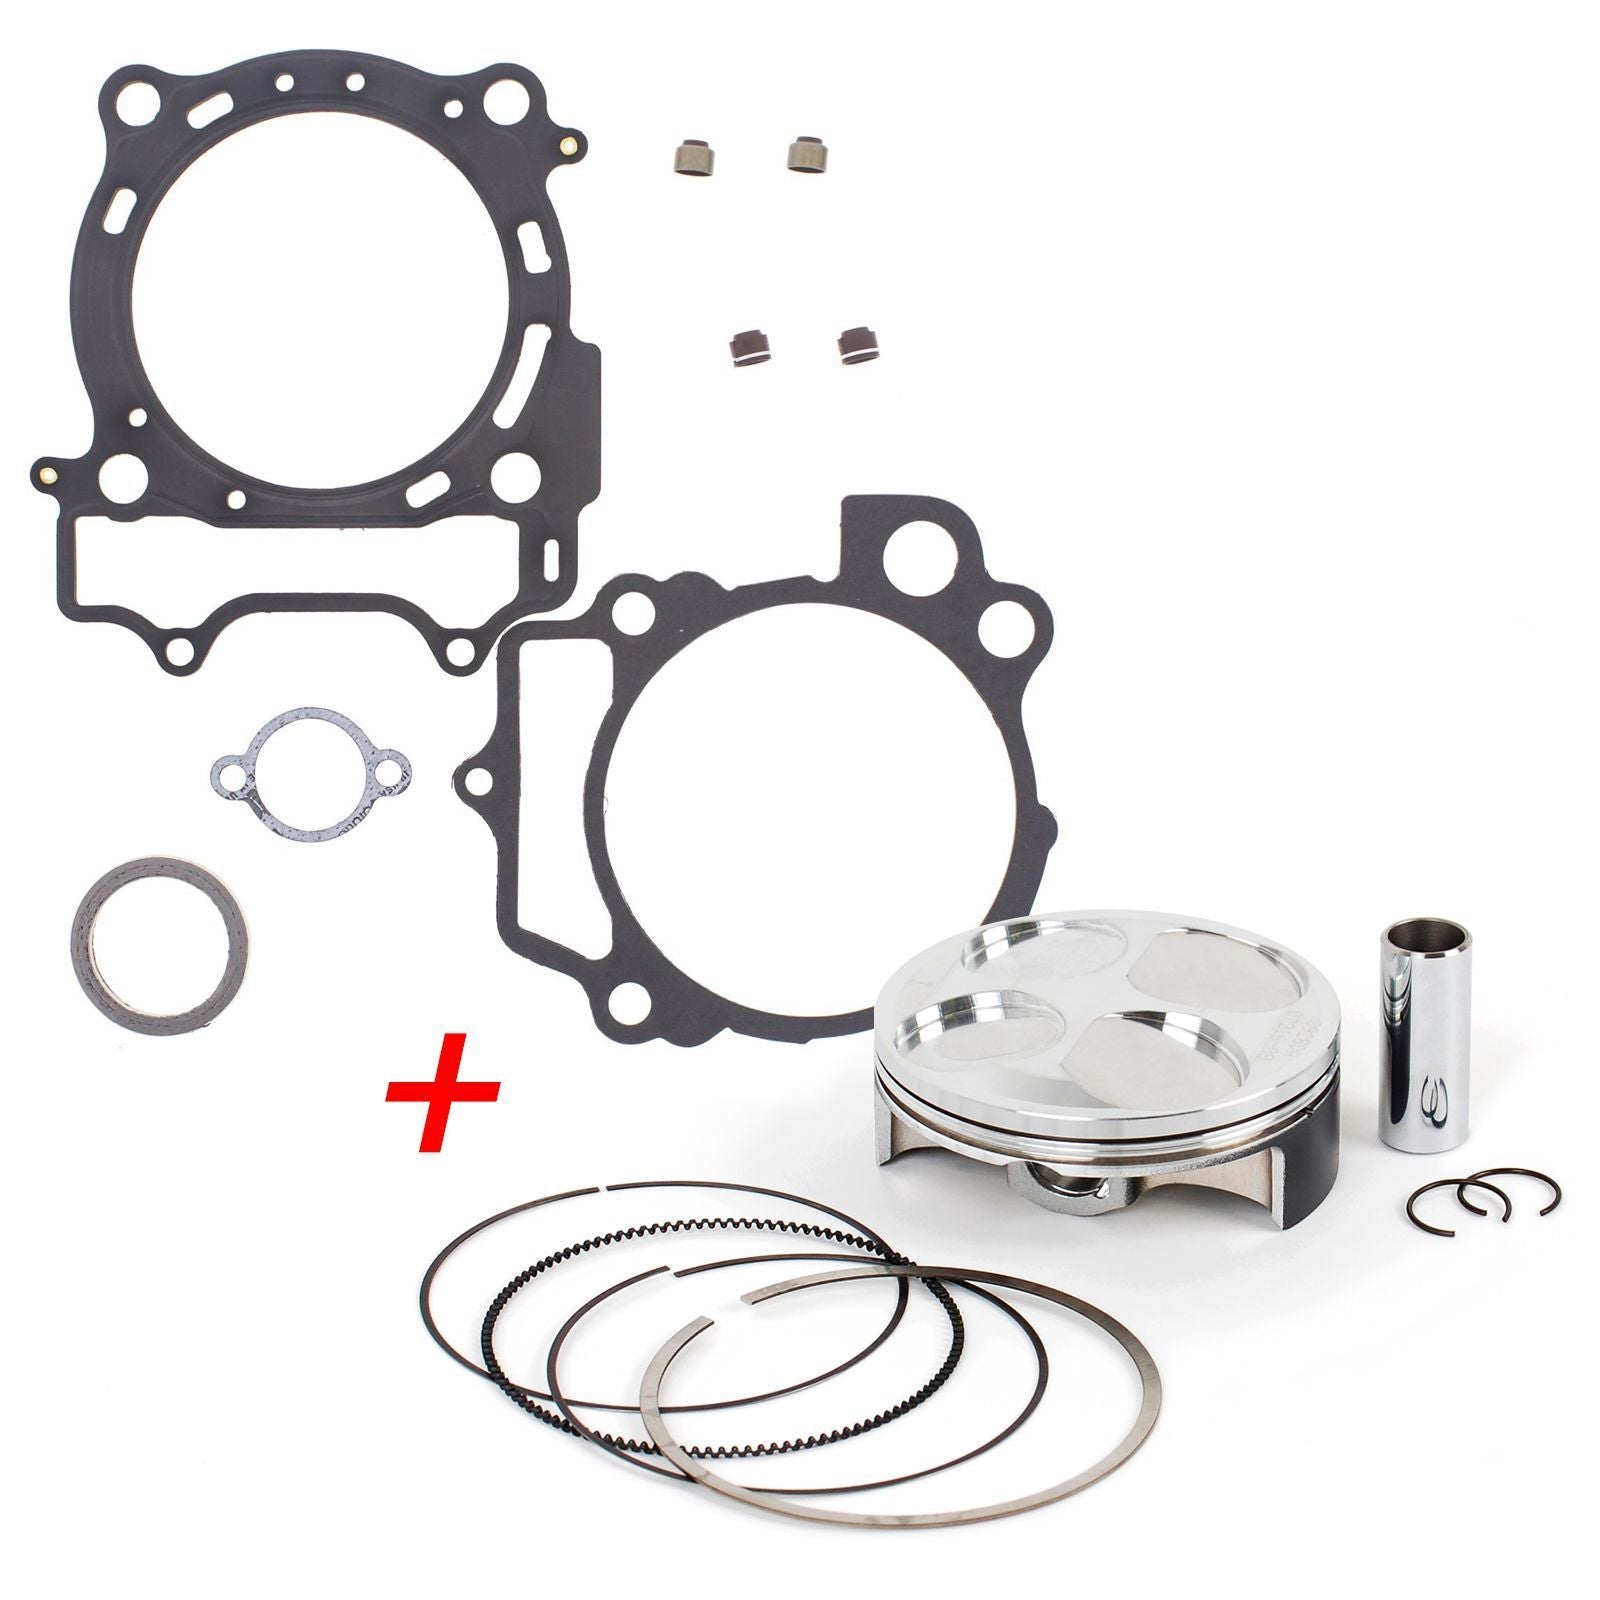 New Top End Rebuild Kit (A) For Yamaha WR250F 2015-2019 #ERTY031A